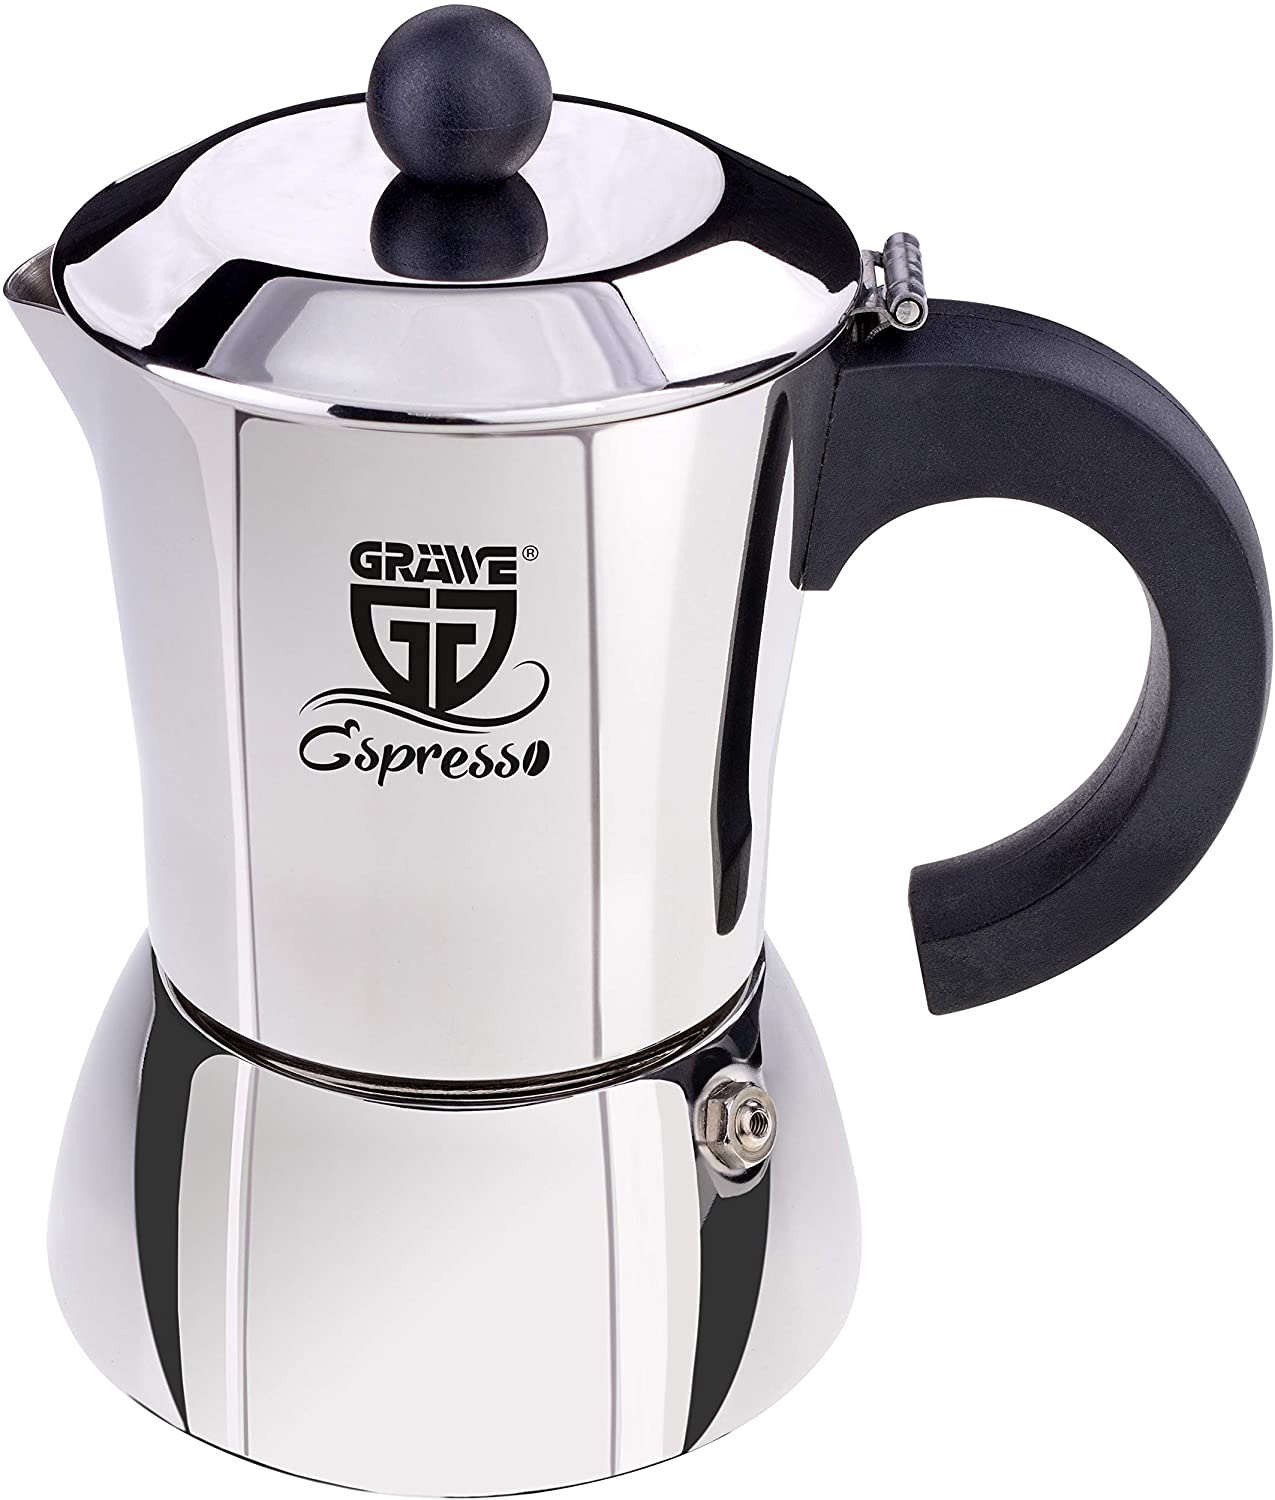 GRAWE Gräwe espresso maker, made of stainless steel (0 % aluminium), capacity approximately 200 ml or 4 small cups, also suitable for induction cookers